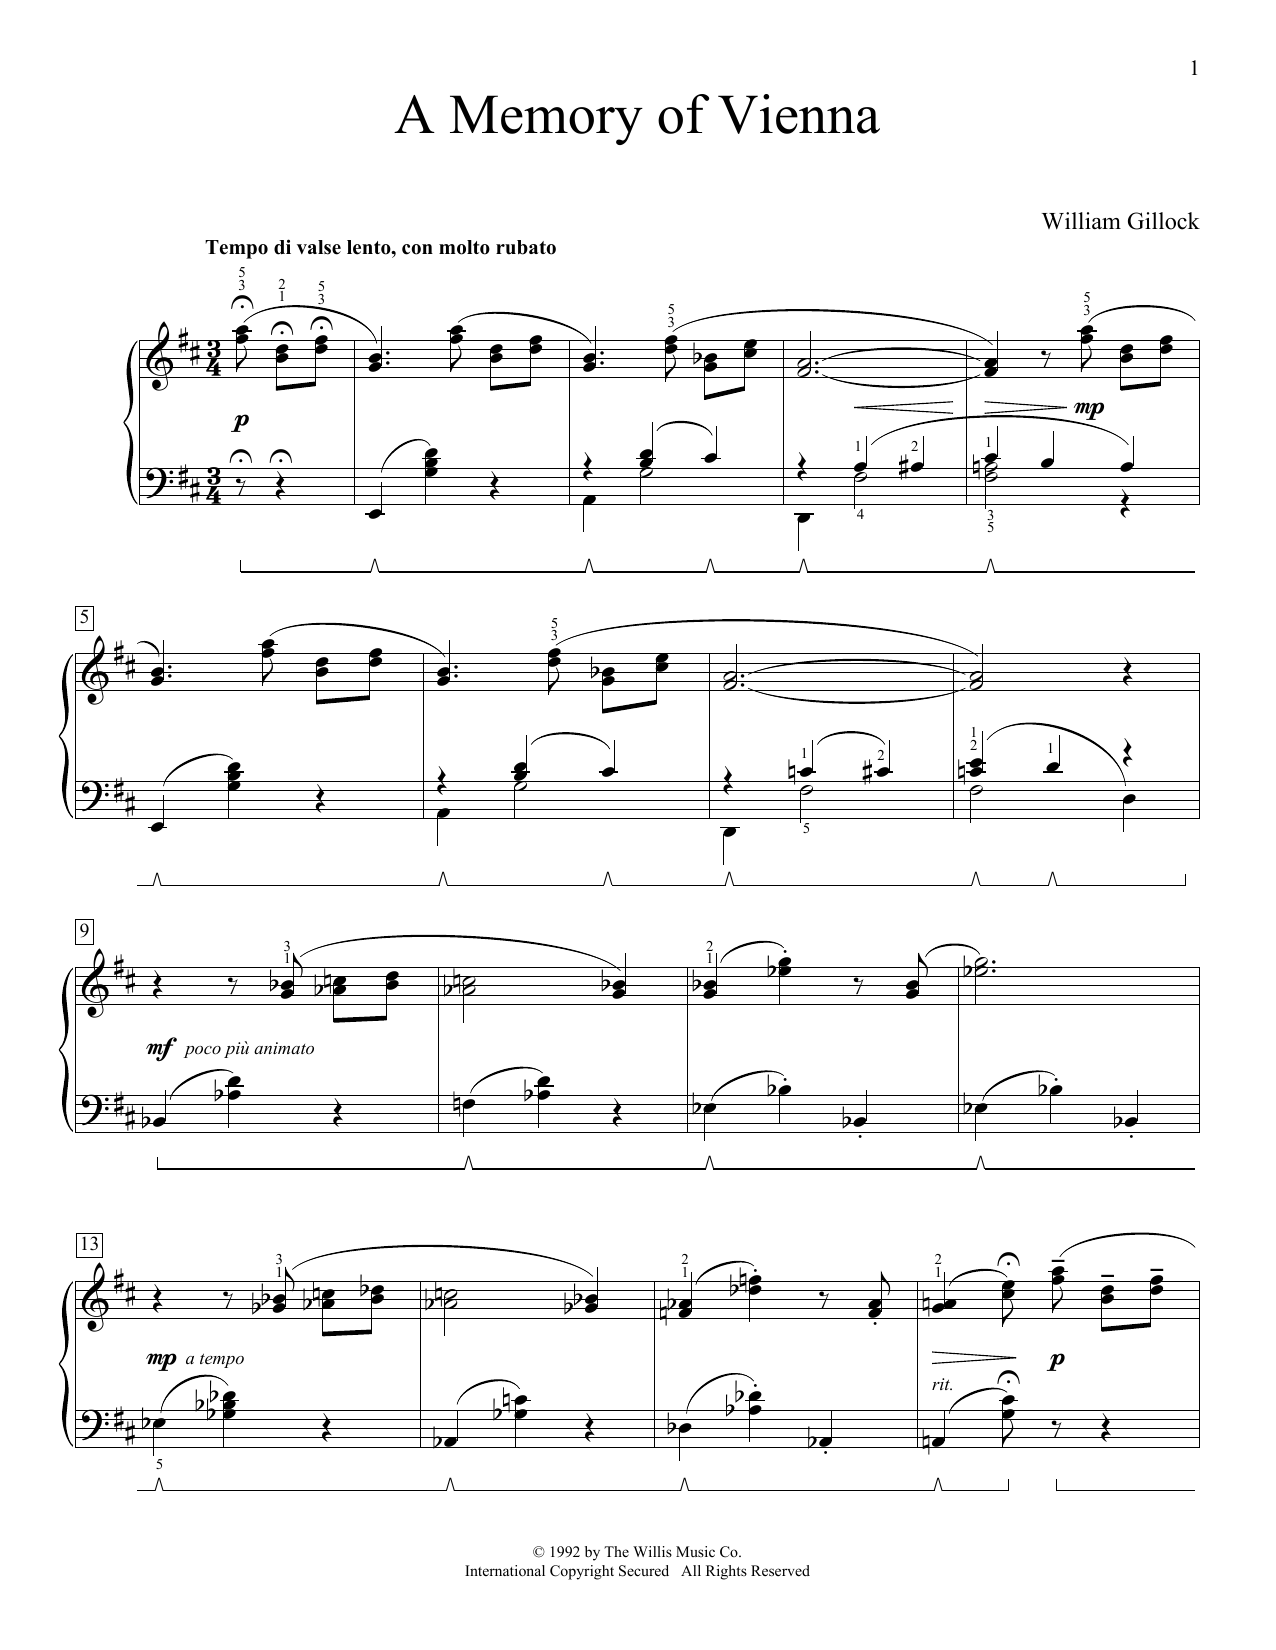 William Gillock A Memory Of Vienna sheet music notes printable PDF score